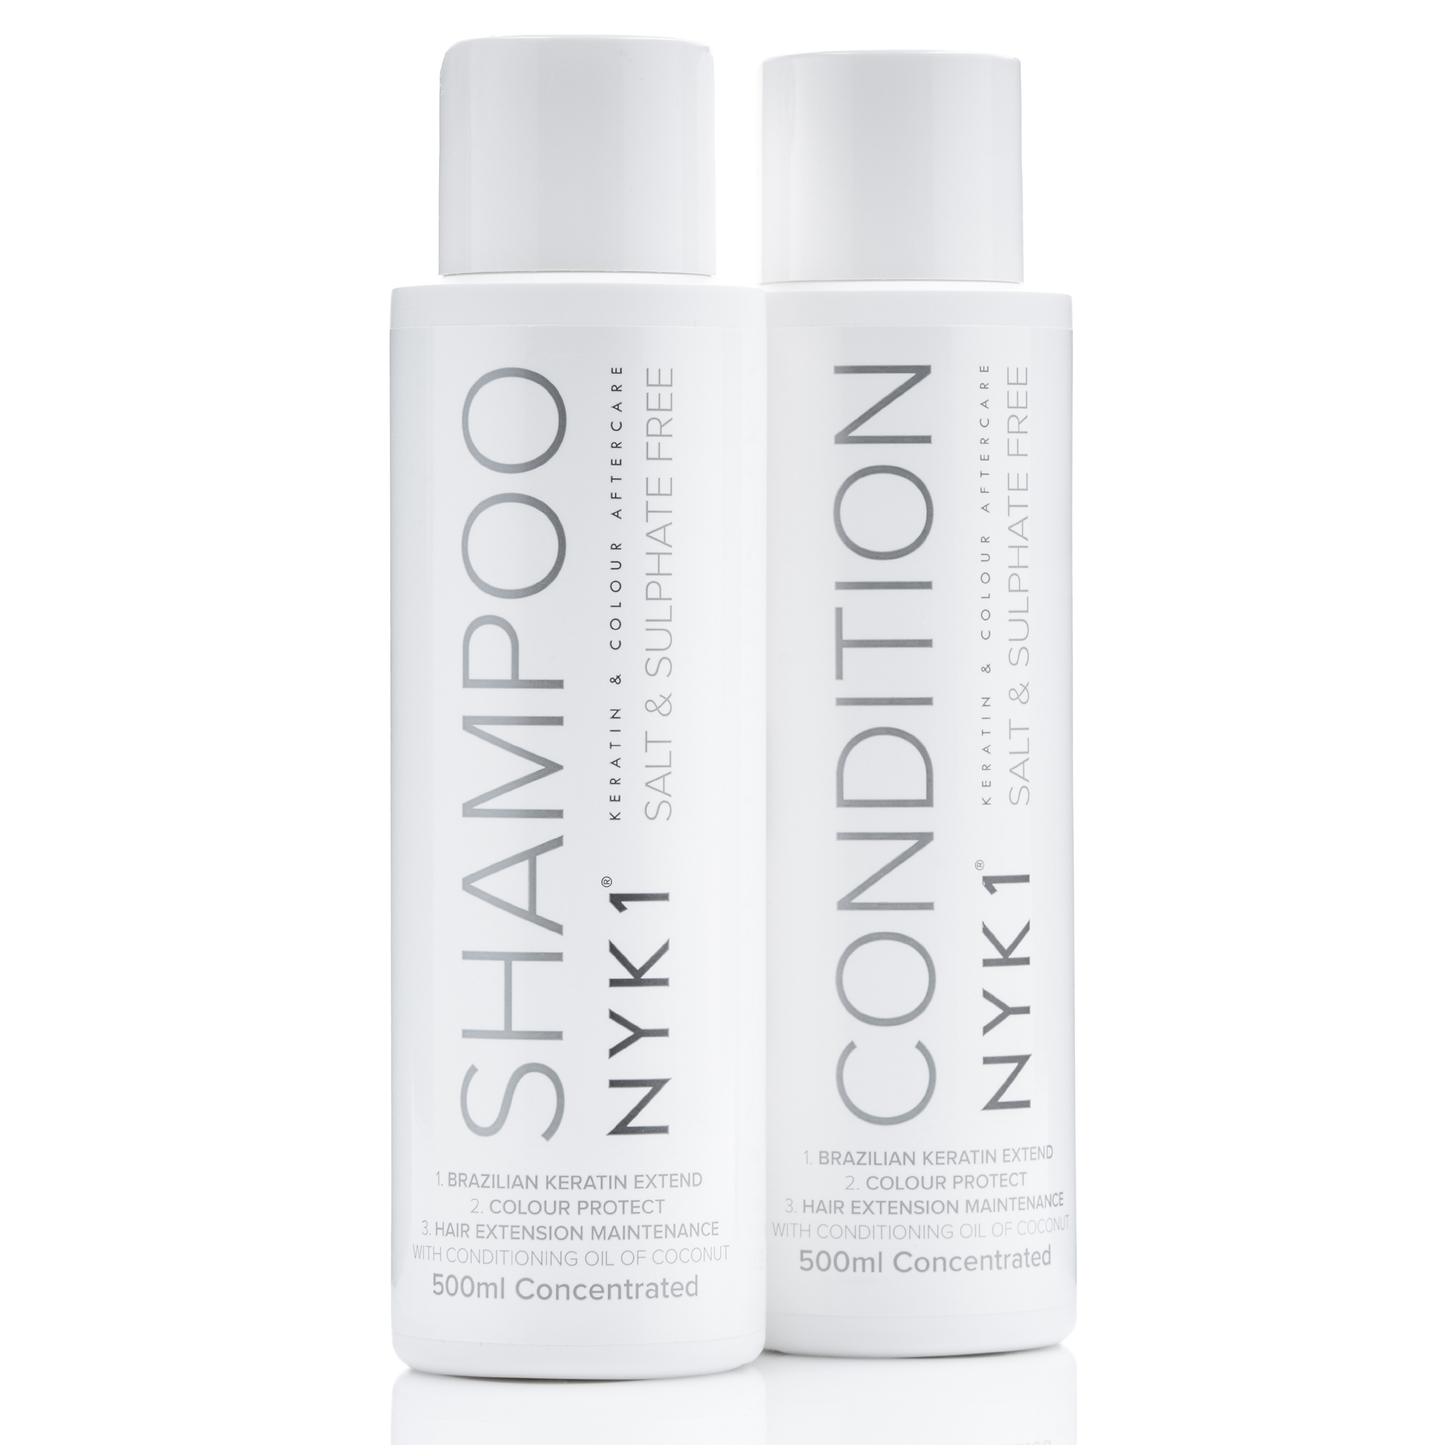 NYK1 Salt Free Sulphate Free Aftercare Shampoo Or Conditioner Keratin Colour